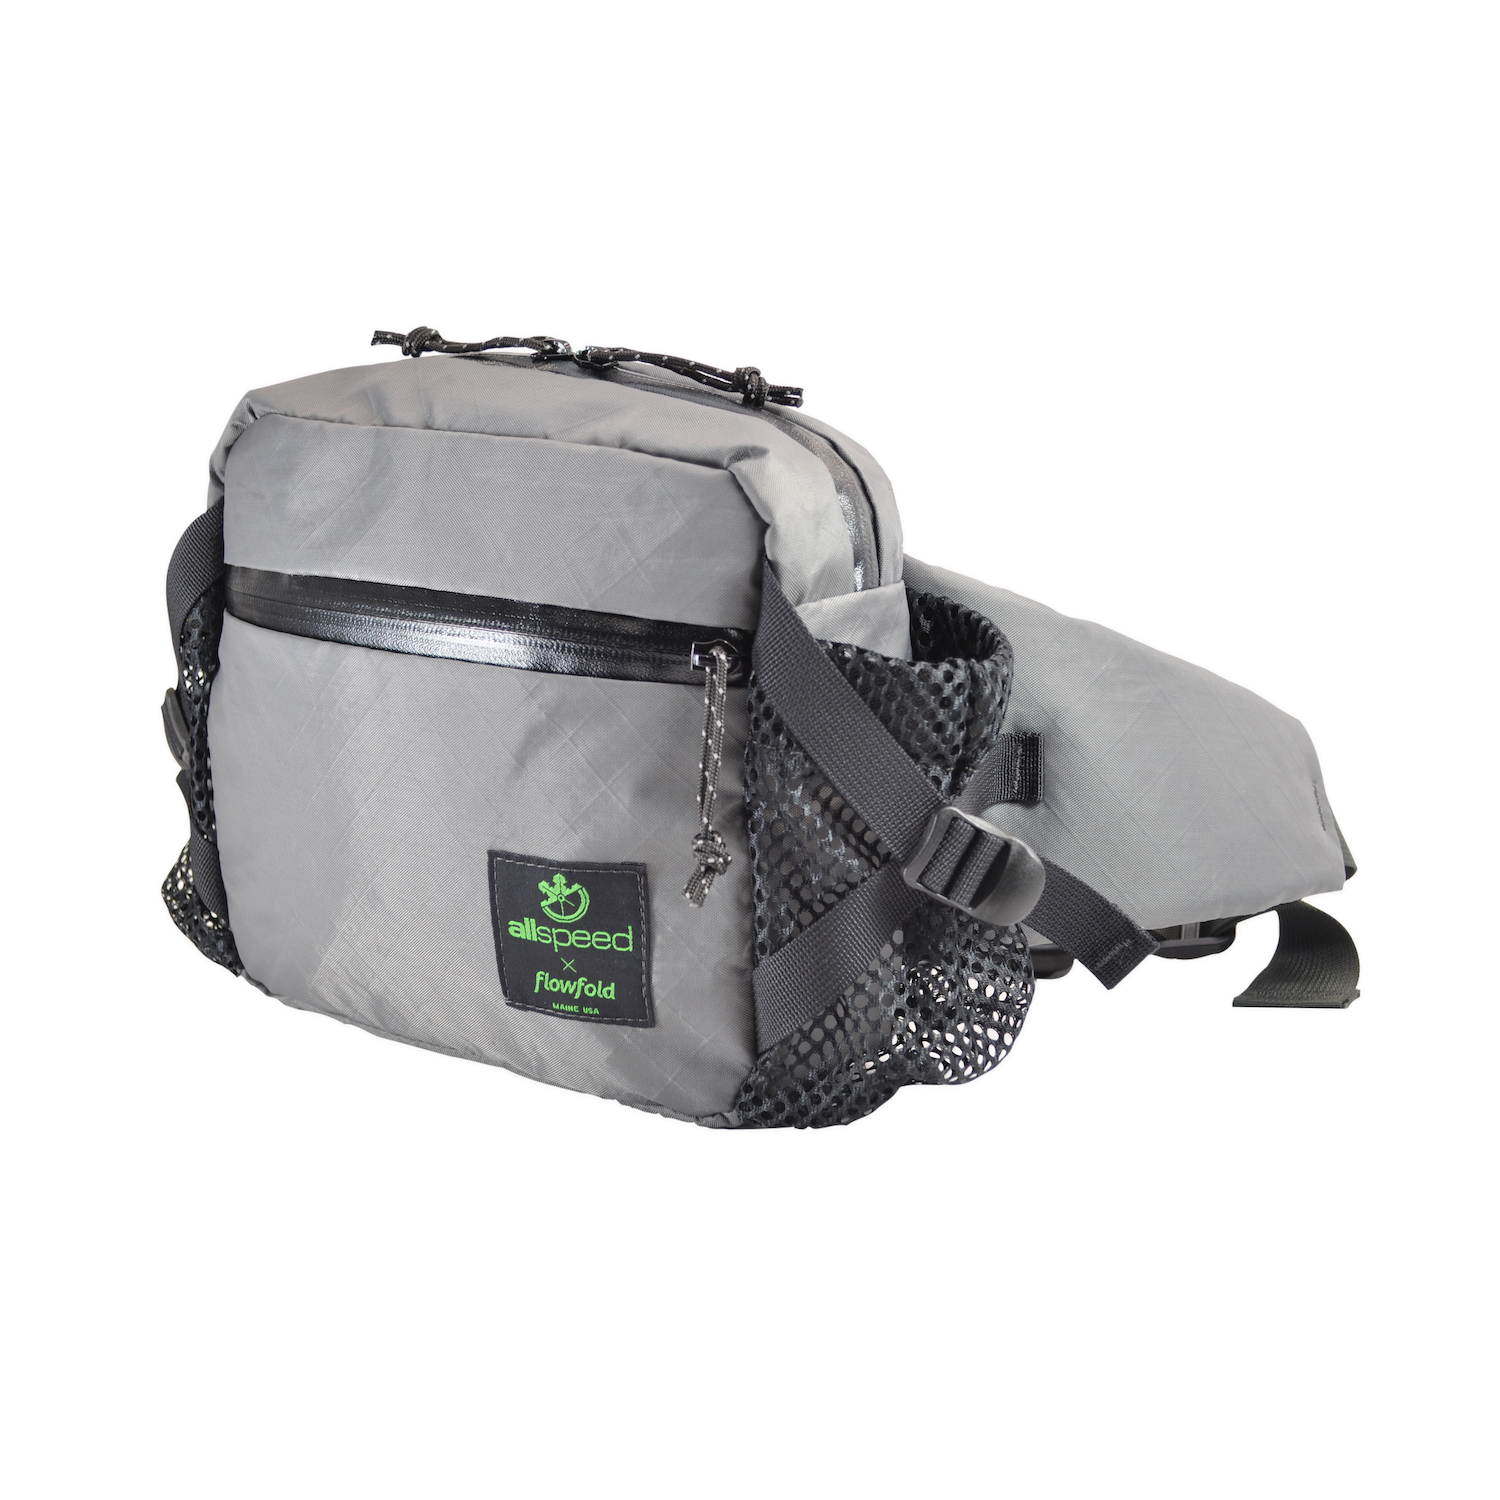 Allspeed x Flowfold Hip Pack - Recycled Wolf Grey